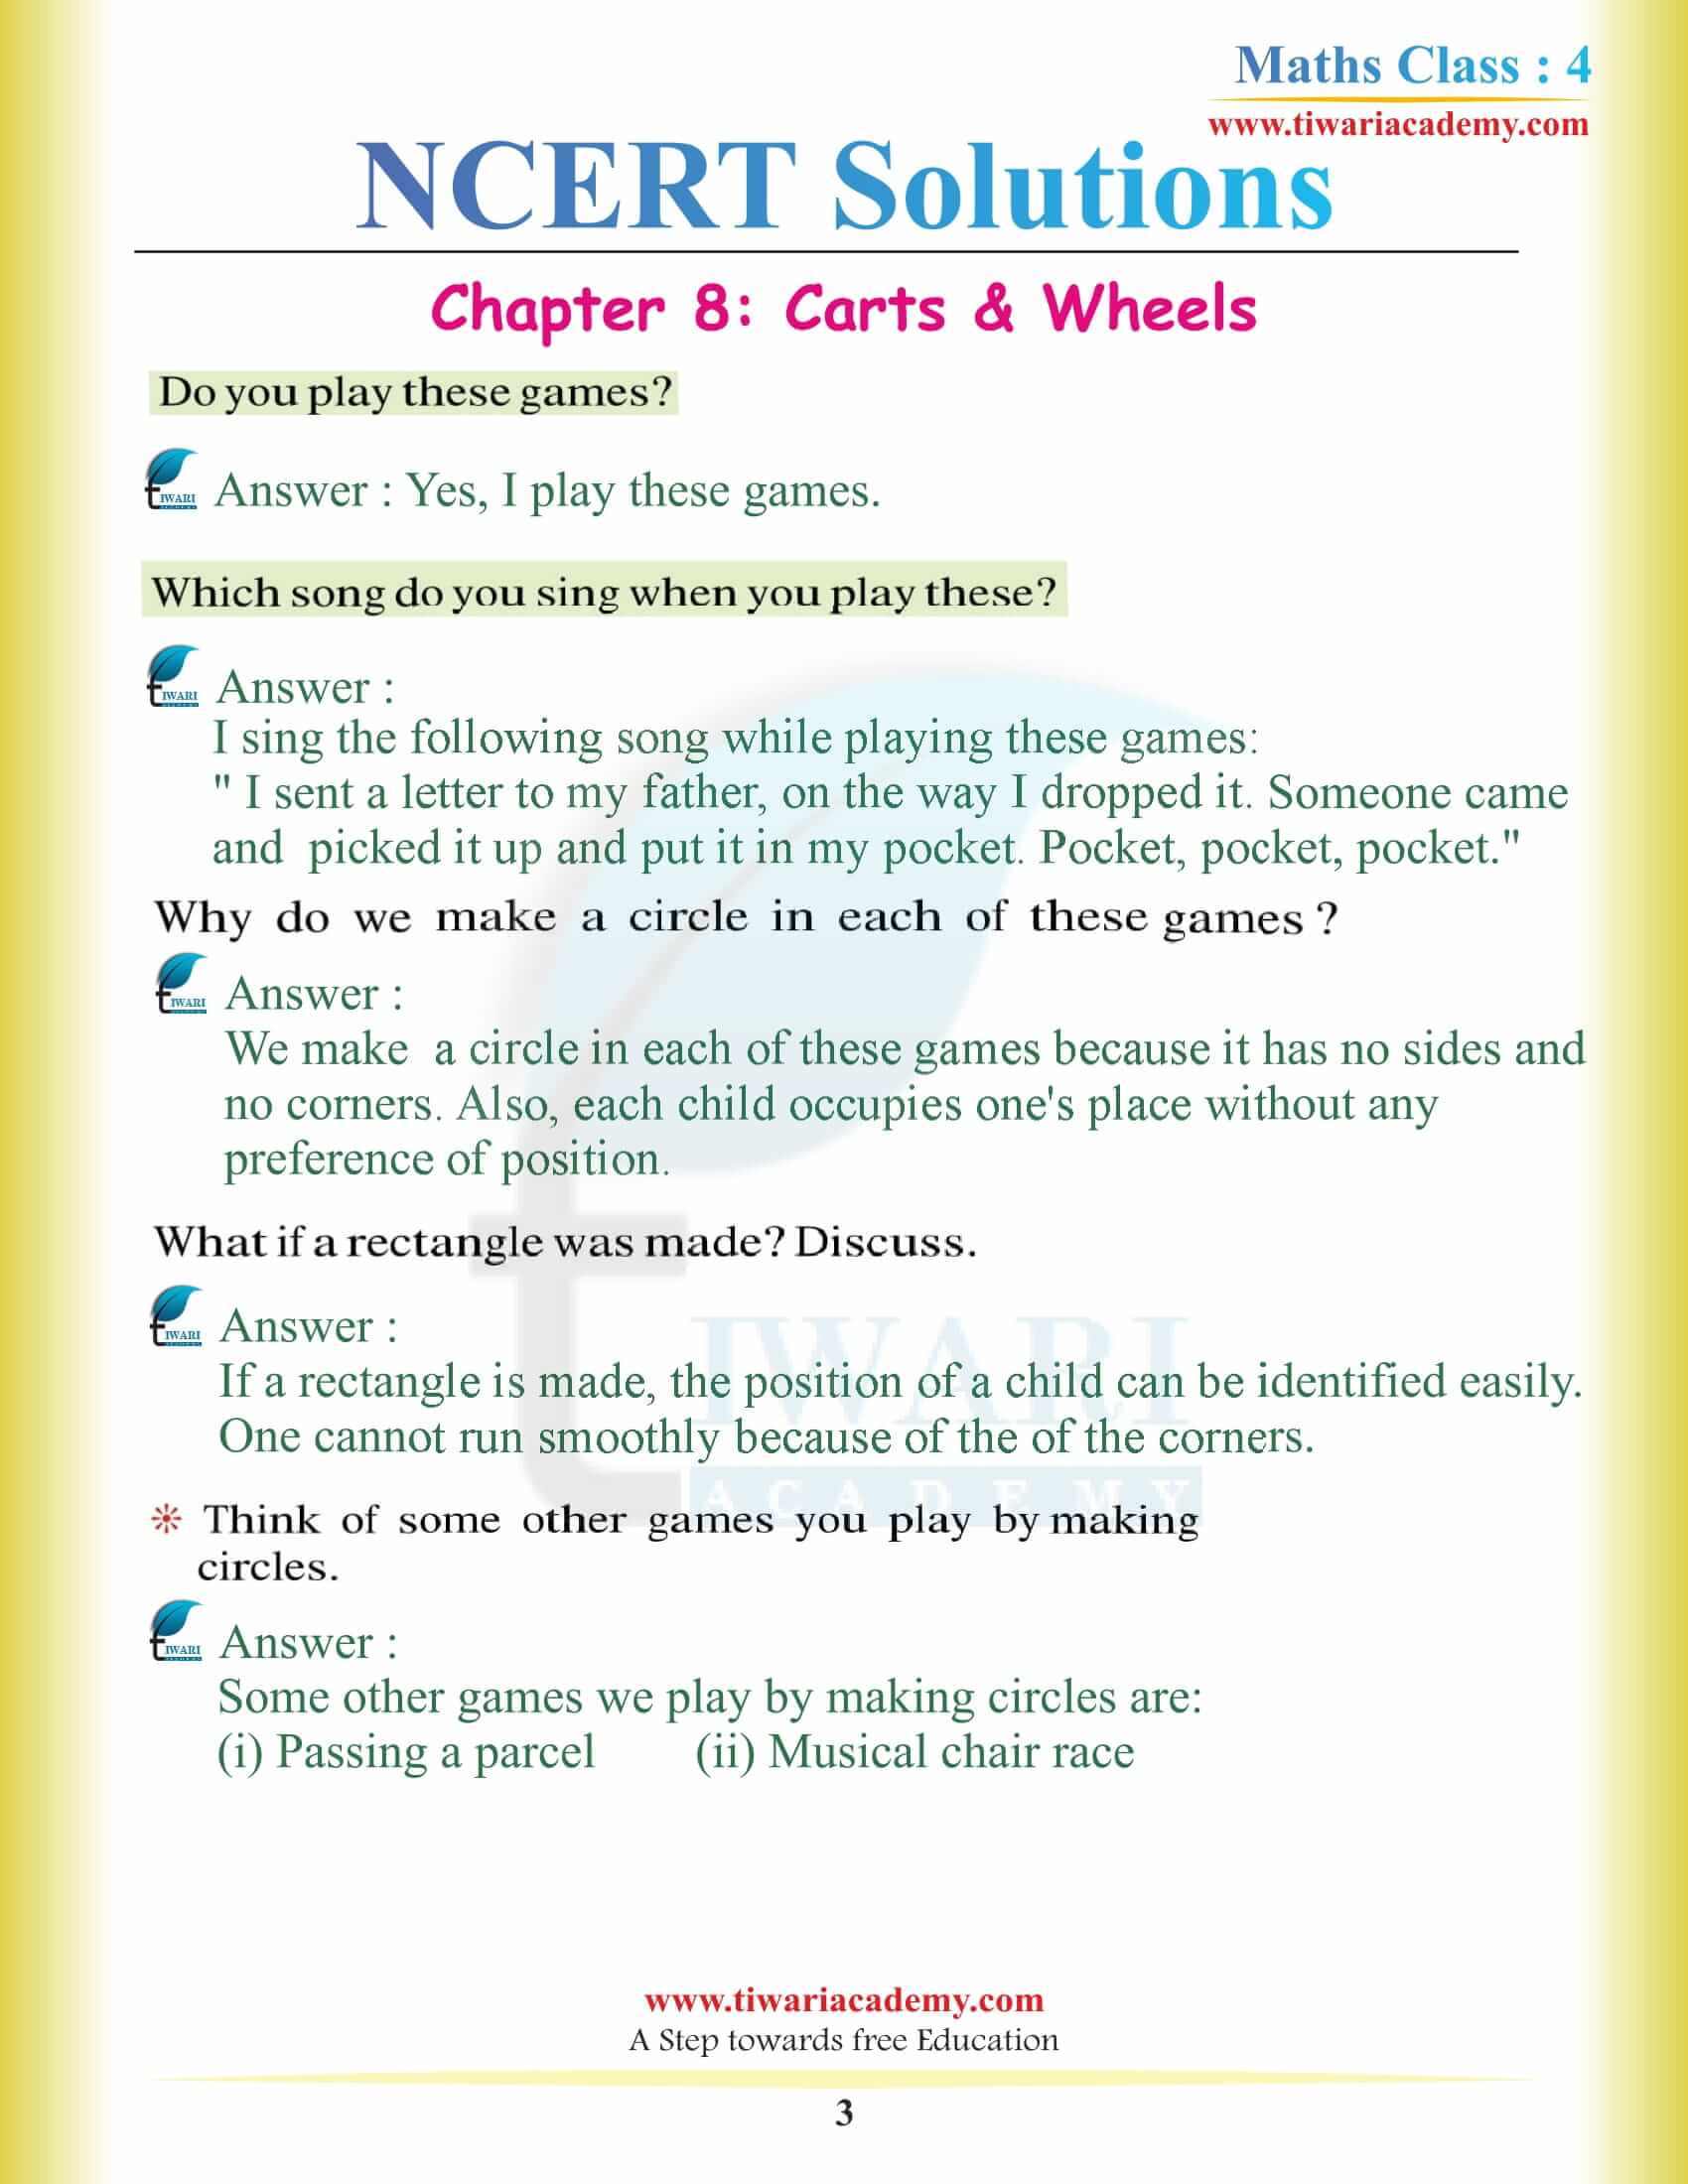 NCERT Solutions for Class 4 Maths Chapter 8 in PDF